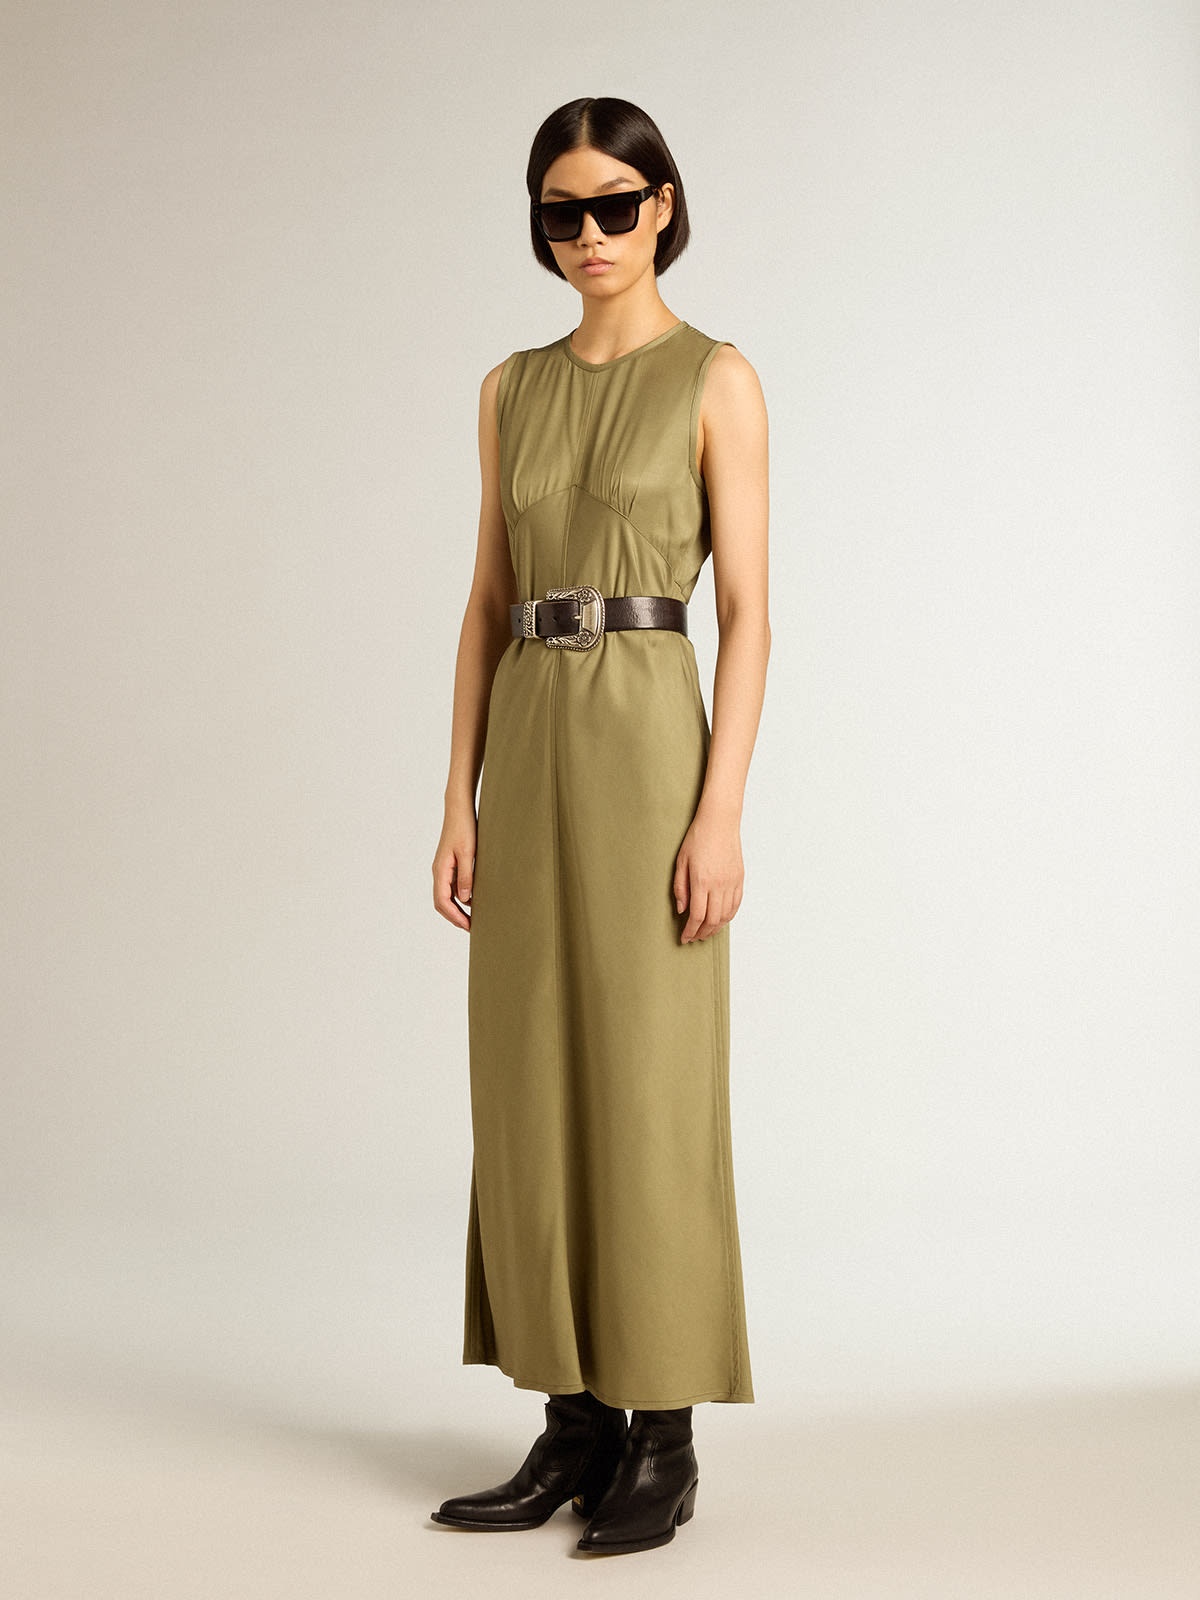 Olive-colored women's midi dress with zip fastening on the back - 3